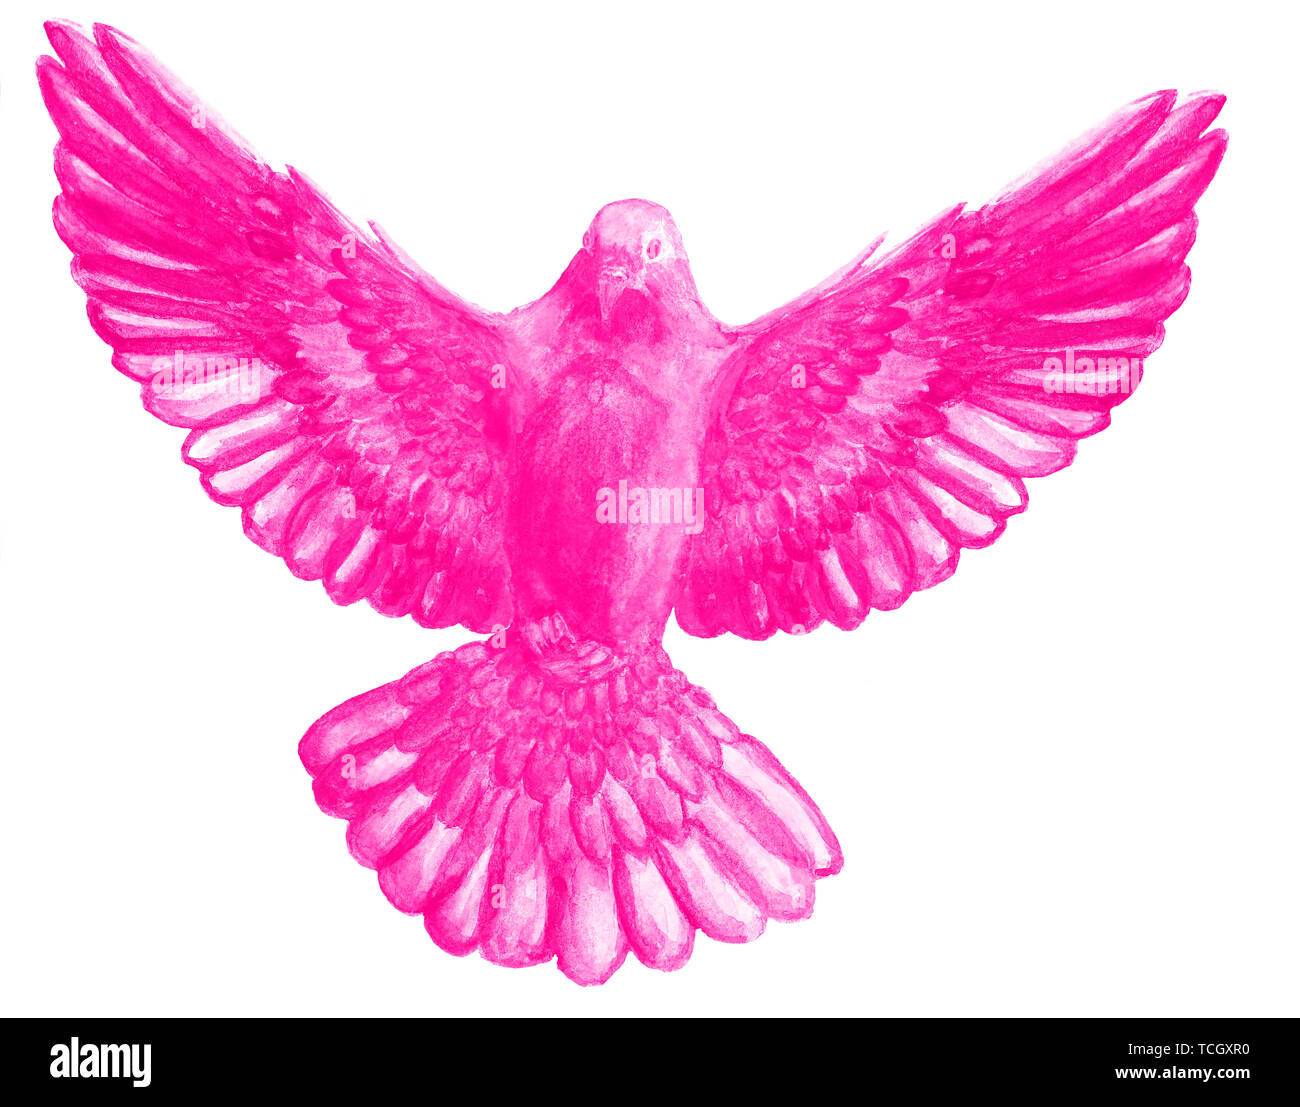 Watercolor and digital watercolor illustration of unicolor bird, pigeon in pink color, symbol of the Holy Spirit, isolated on white background. Stock Photo